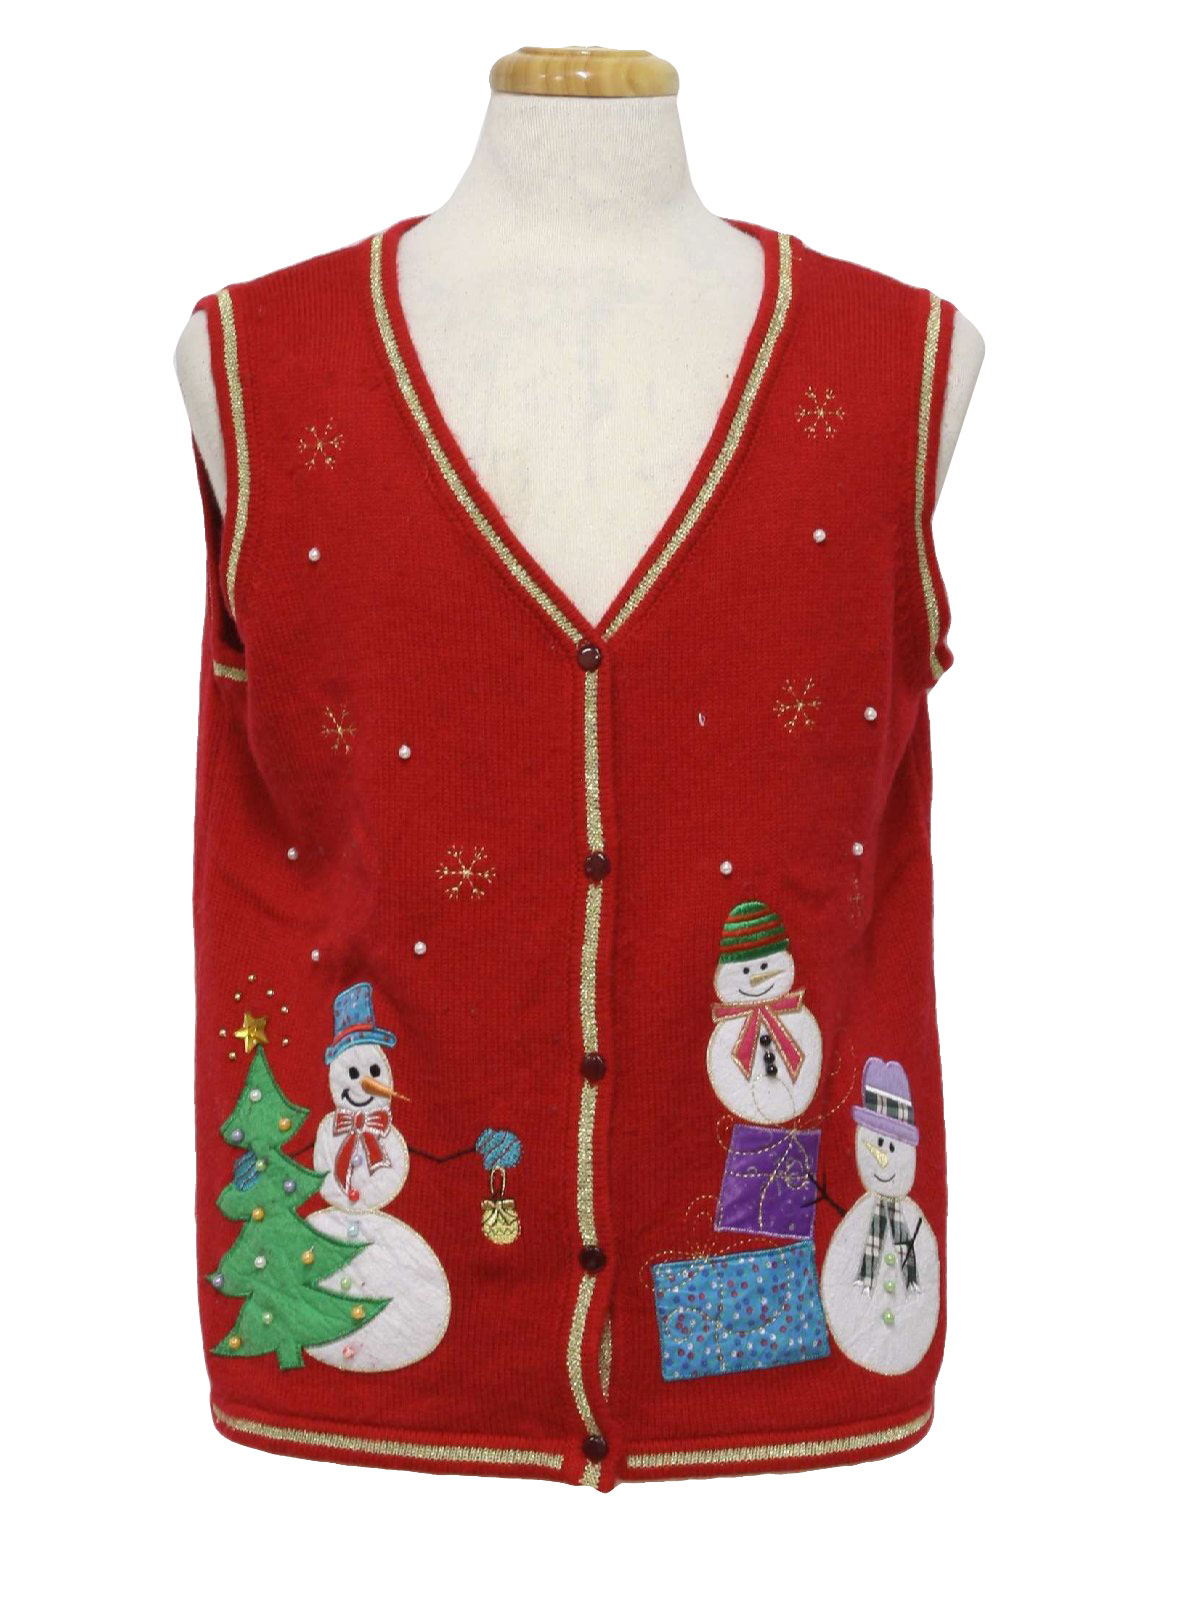 Ugly Christmas Sweater Vest: -No Label- Unisex red and white background ...